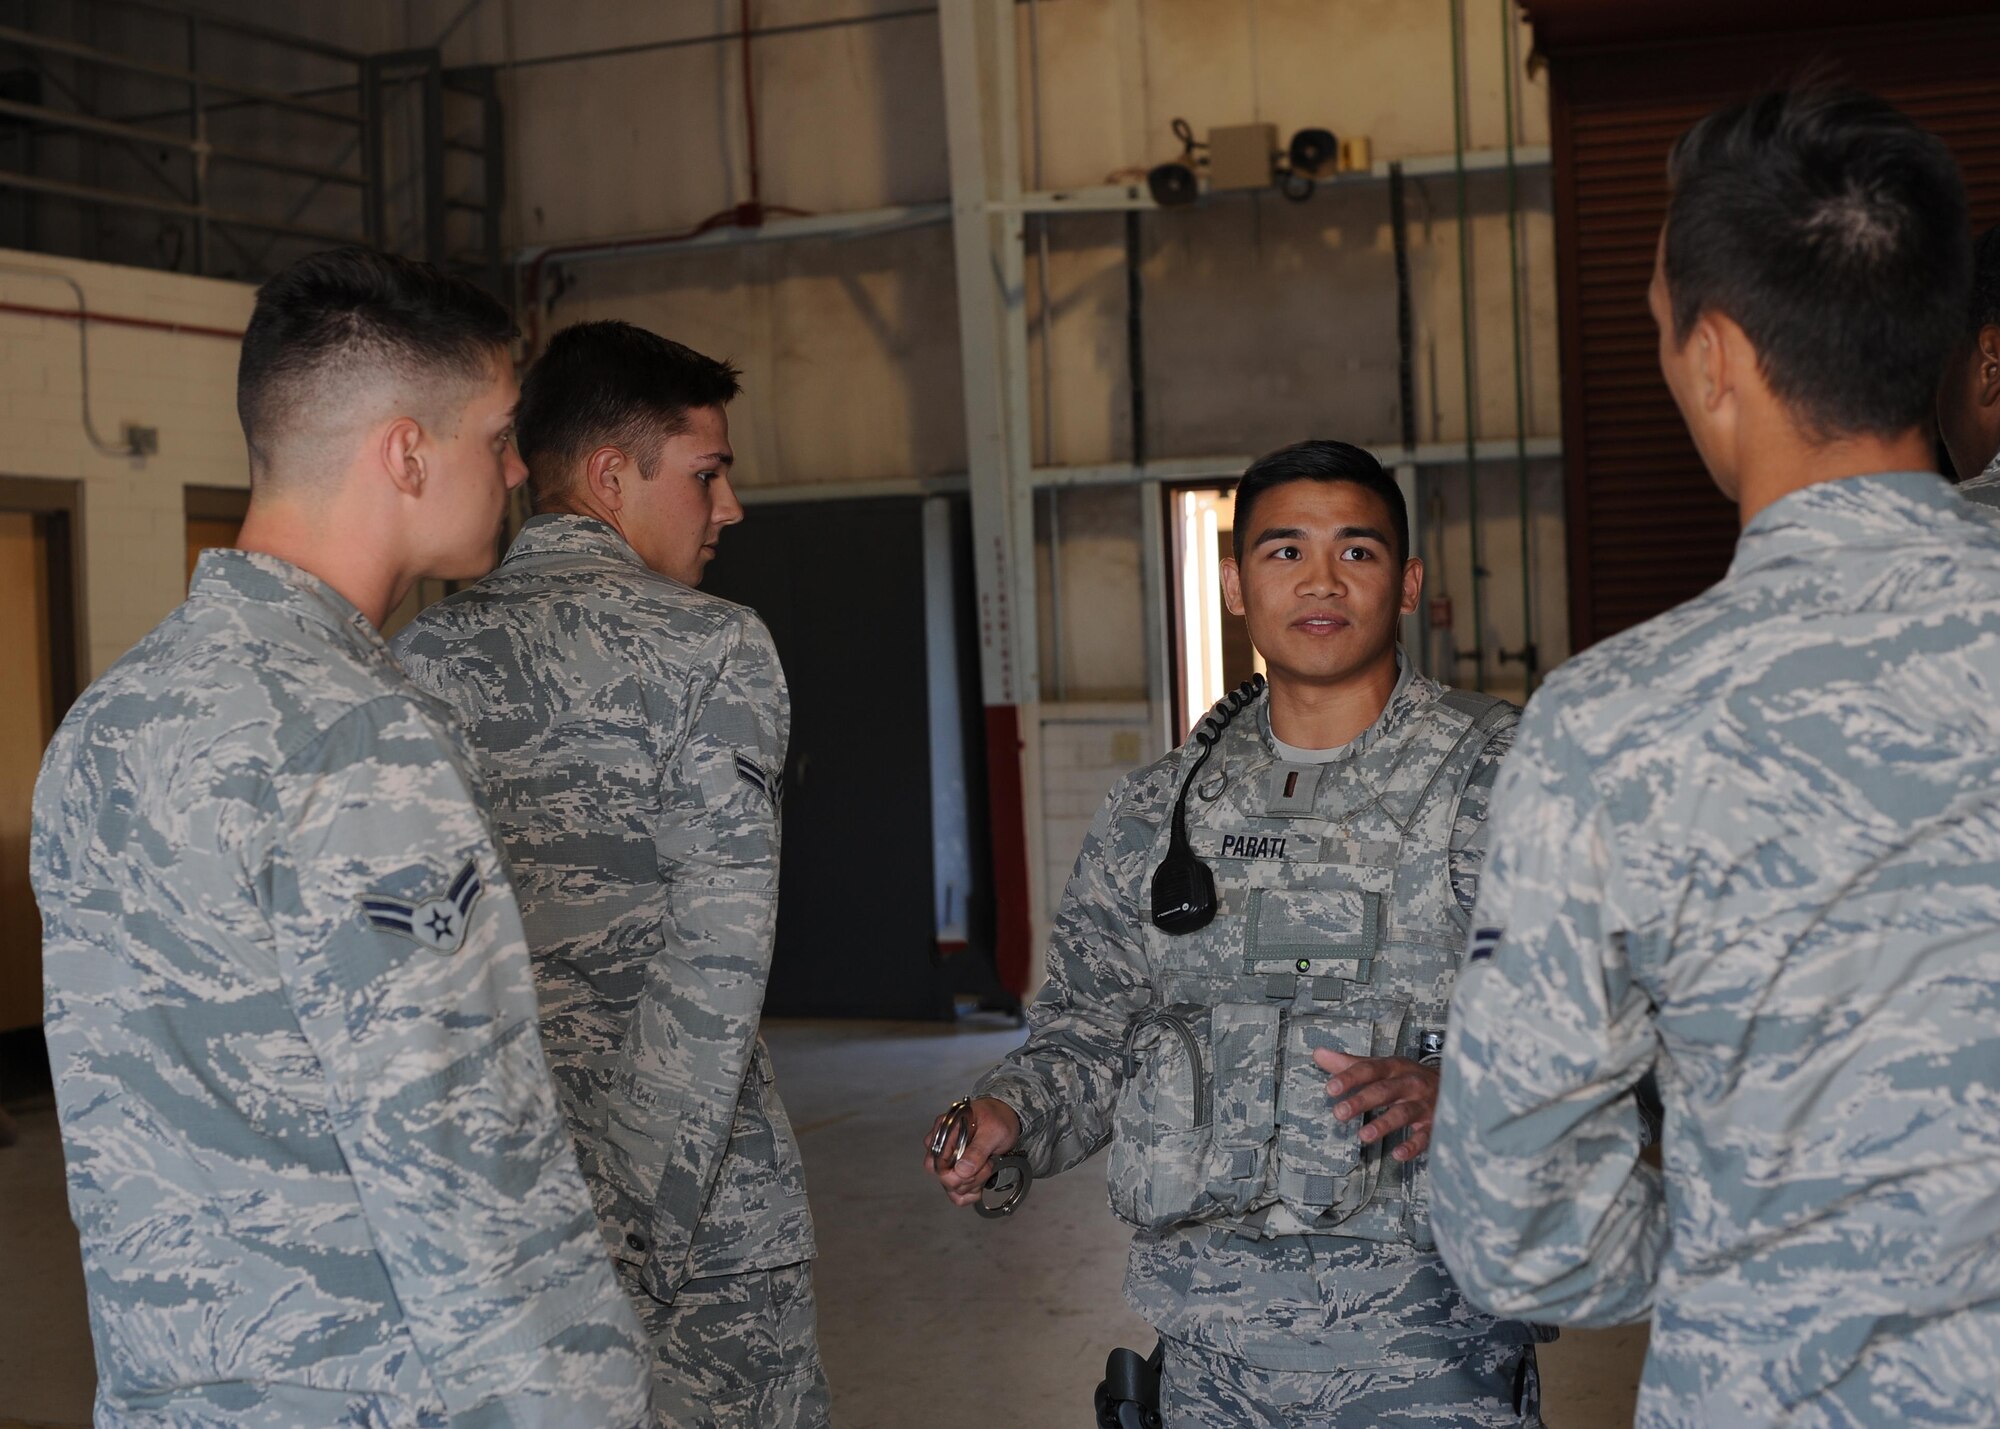 U.S. Air Force 2nd Lt. Robert Parati, 355th Security Forces Squadron flight commander, discusses the importance of technique when handcuffing at Davis-Monthan Air Force Base, Ariz., June 12, 2017. If the offender isn’t properly detained, it can endanger the safety of the arresting officer. (U.S. Air Force photo by Senior Airman Ashley N. Steffen)